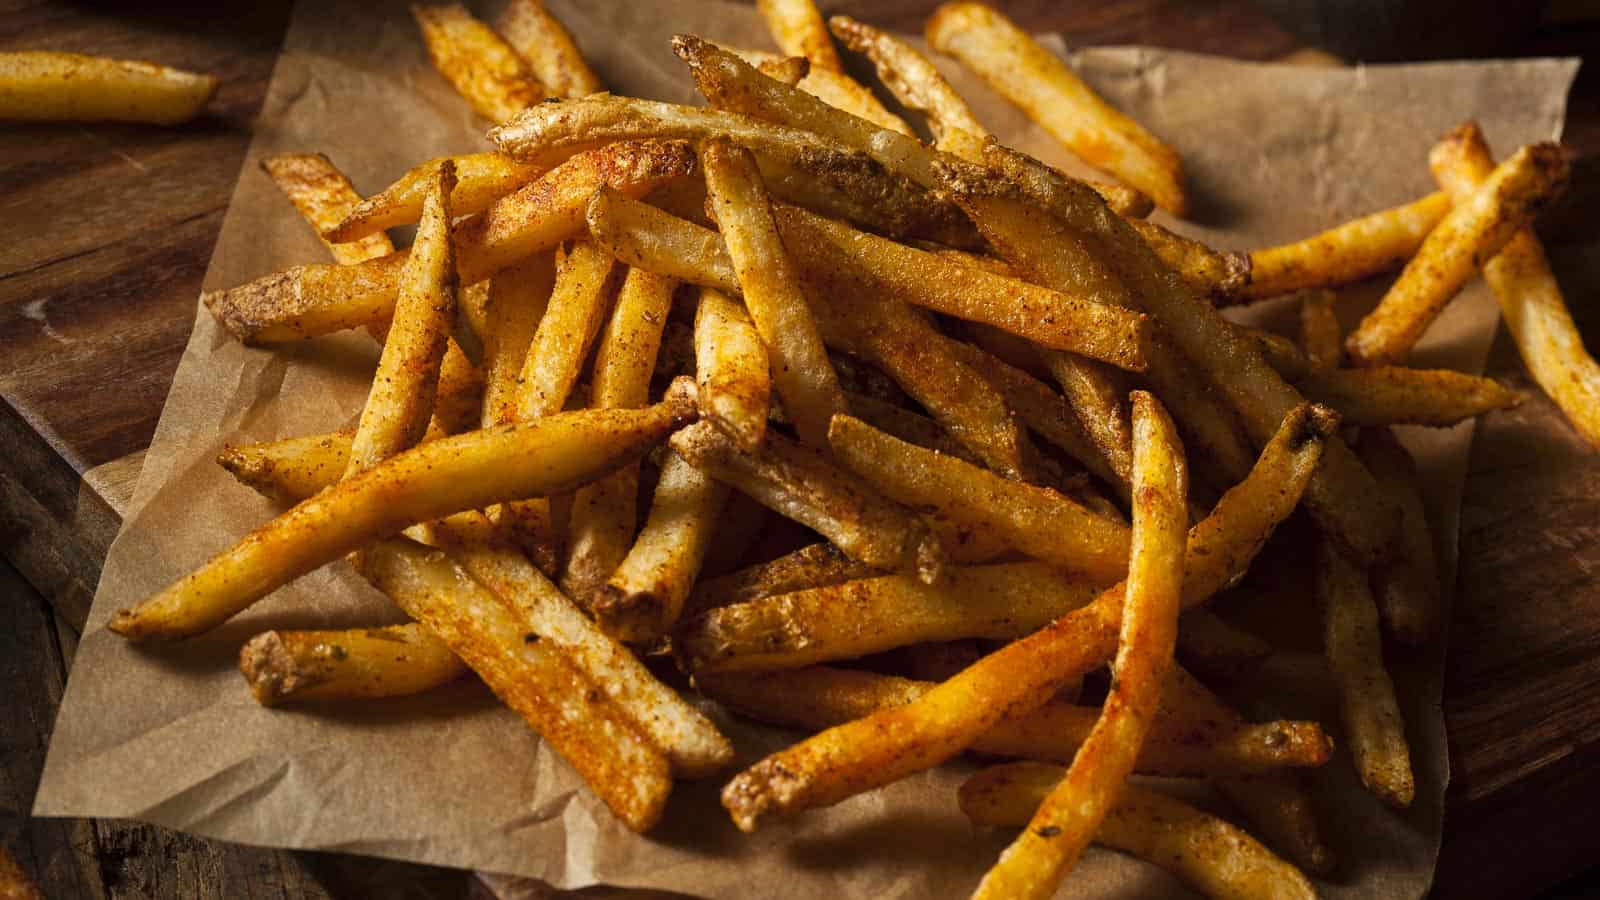 French fries on parchment paper.